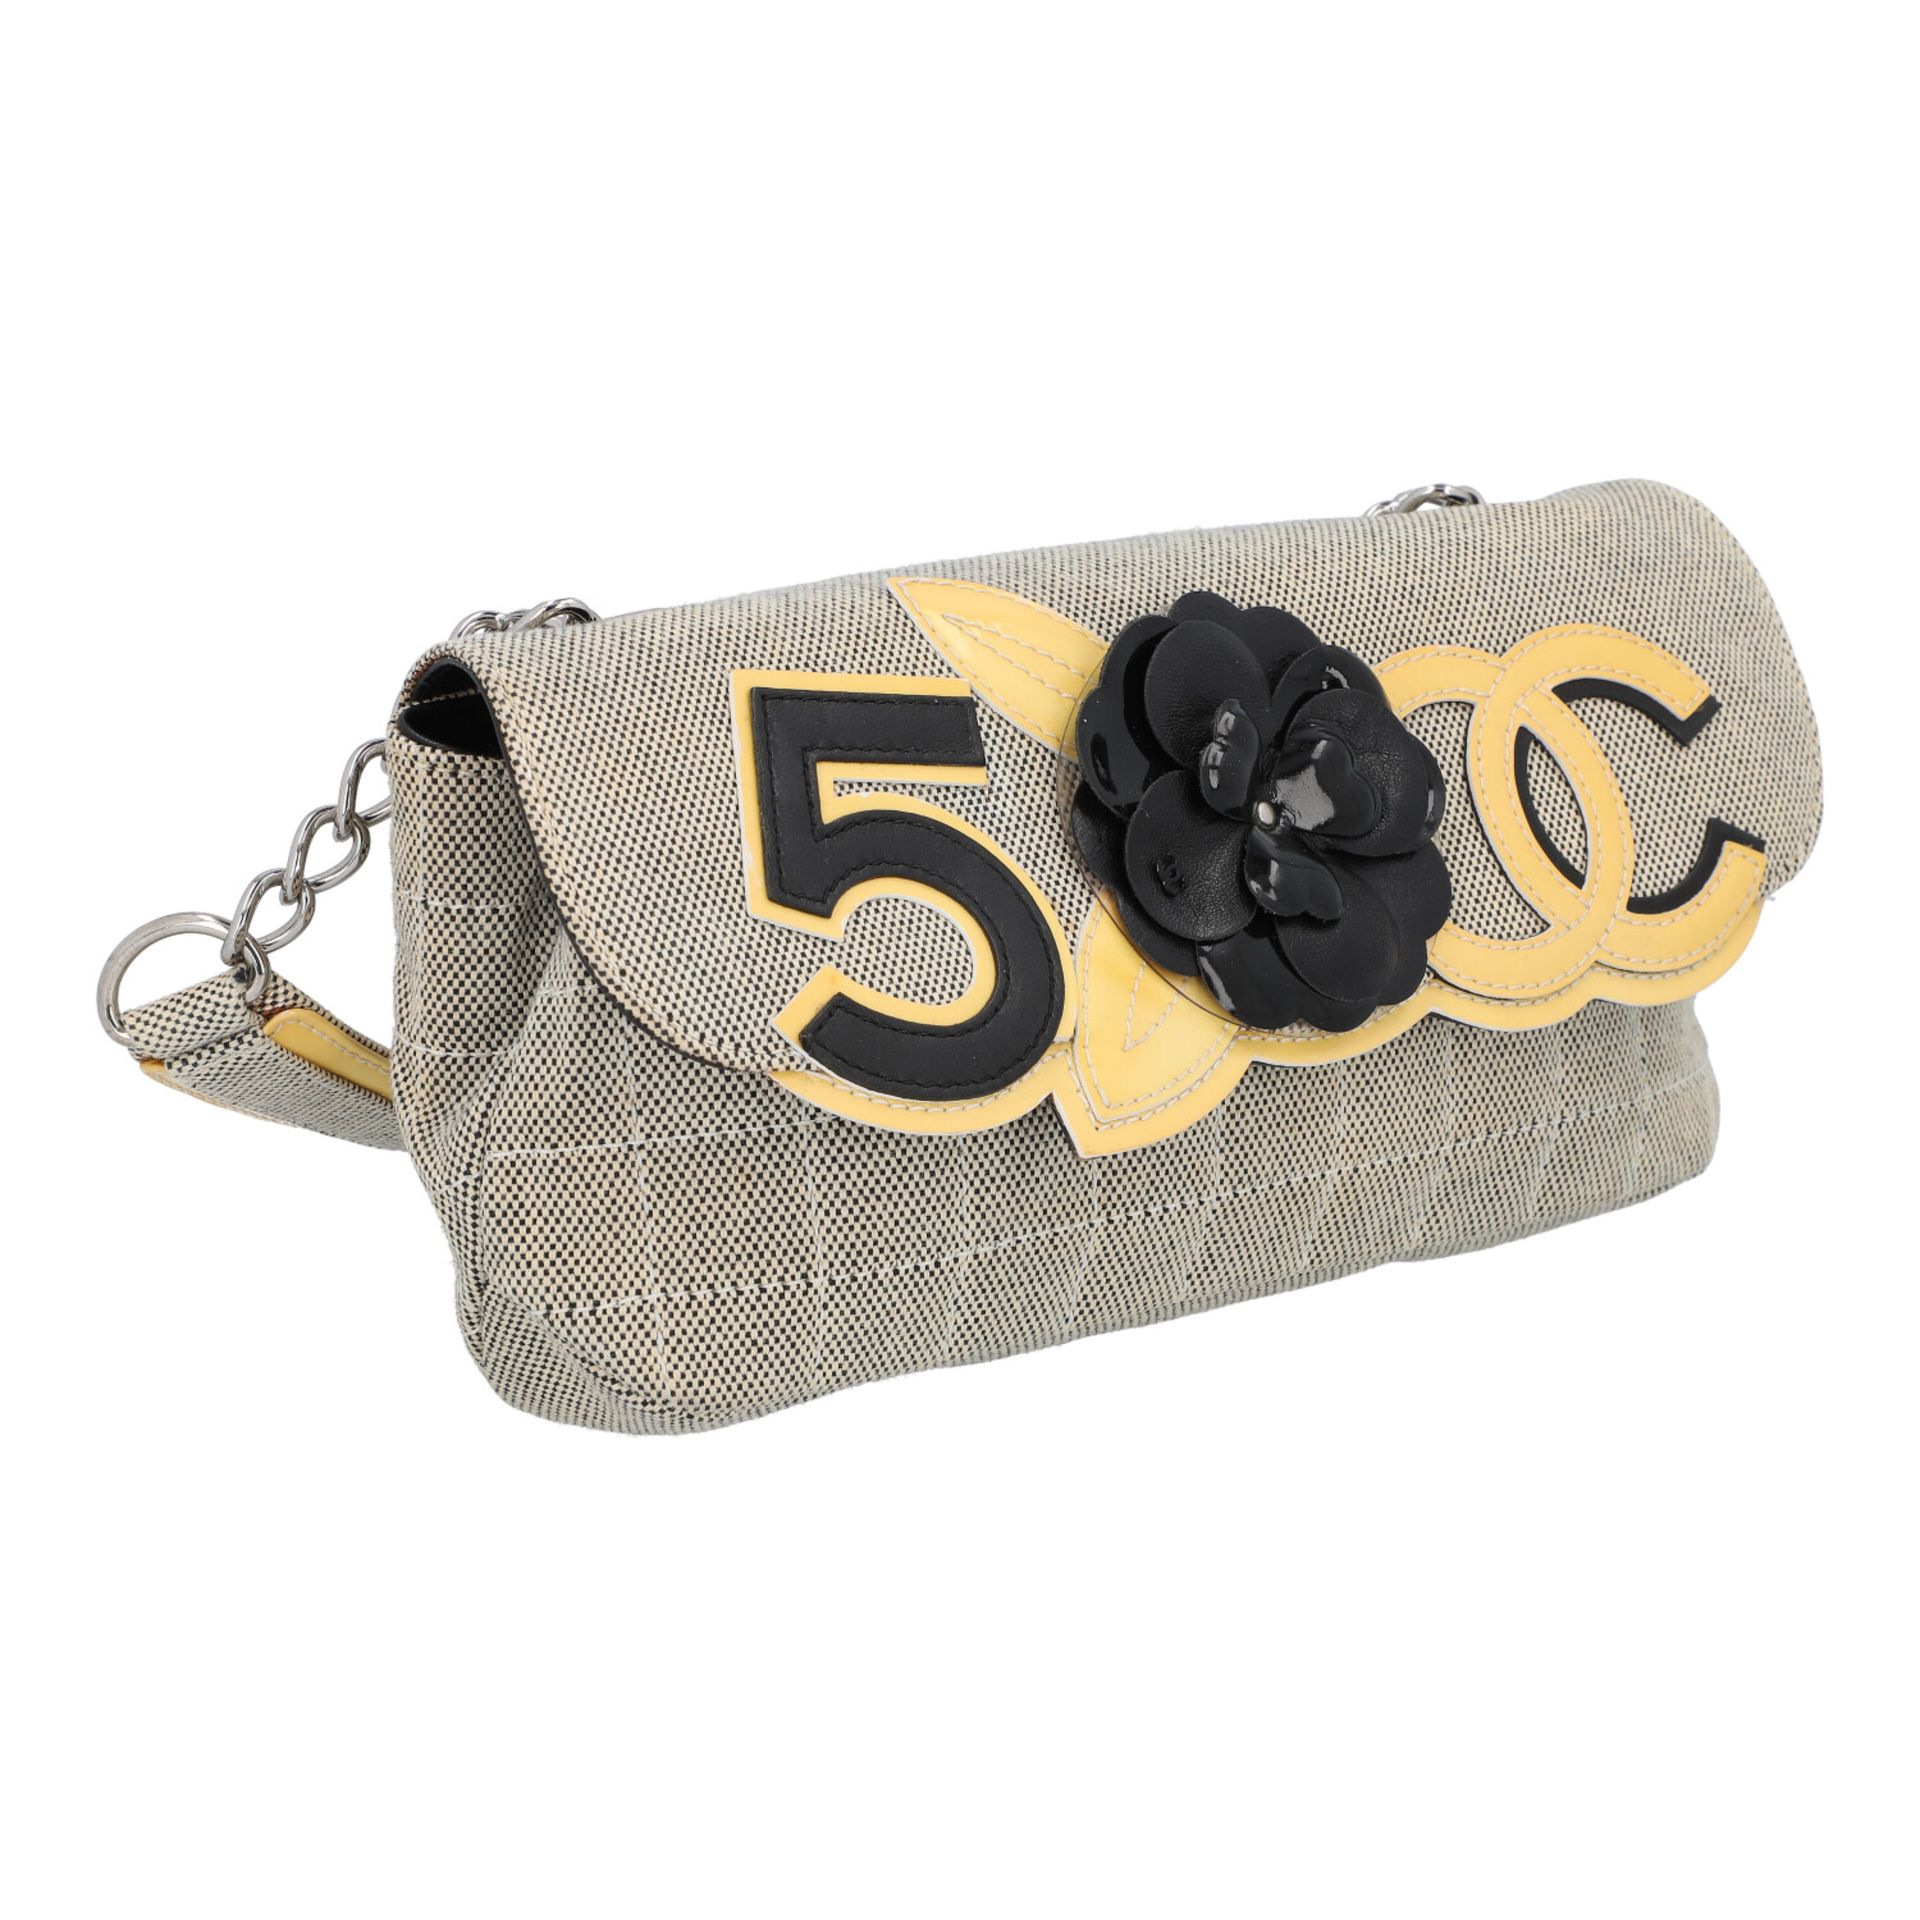 CHANEL Schultertasche "CAMELIA". - Image 2 of 8